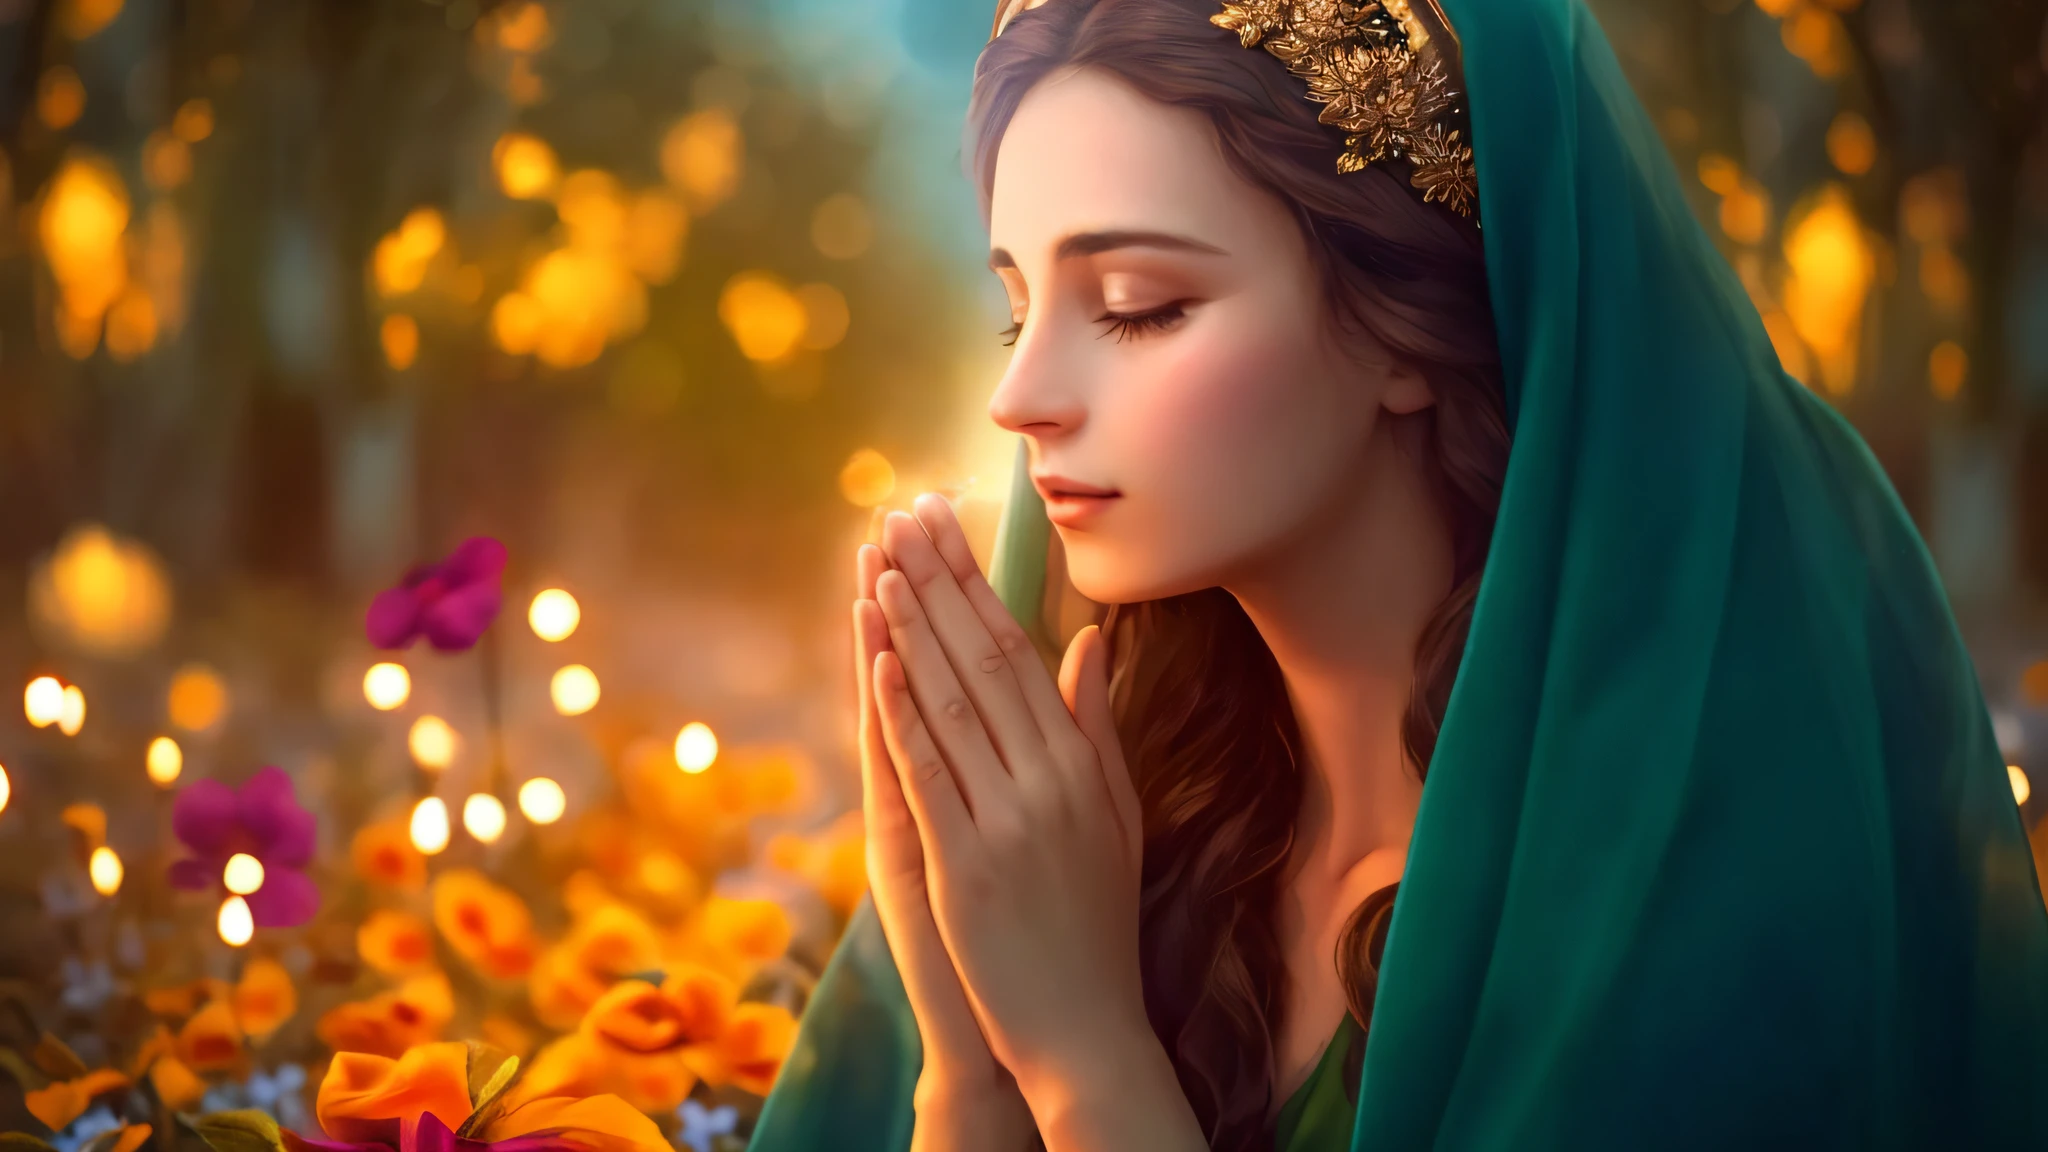 a woman in a green veil is praying in a field of flowers, beautiful goddess, majestic saint woman, pray meditating, religious imagery, religious, praying, holy flame spell, praying at the sun, sacred feminine, beautiful image, beautiful woman, profile pic, beautiful depiction, divine goddess, elf priestess, fae priestess, Virgin Mary --self